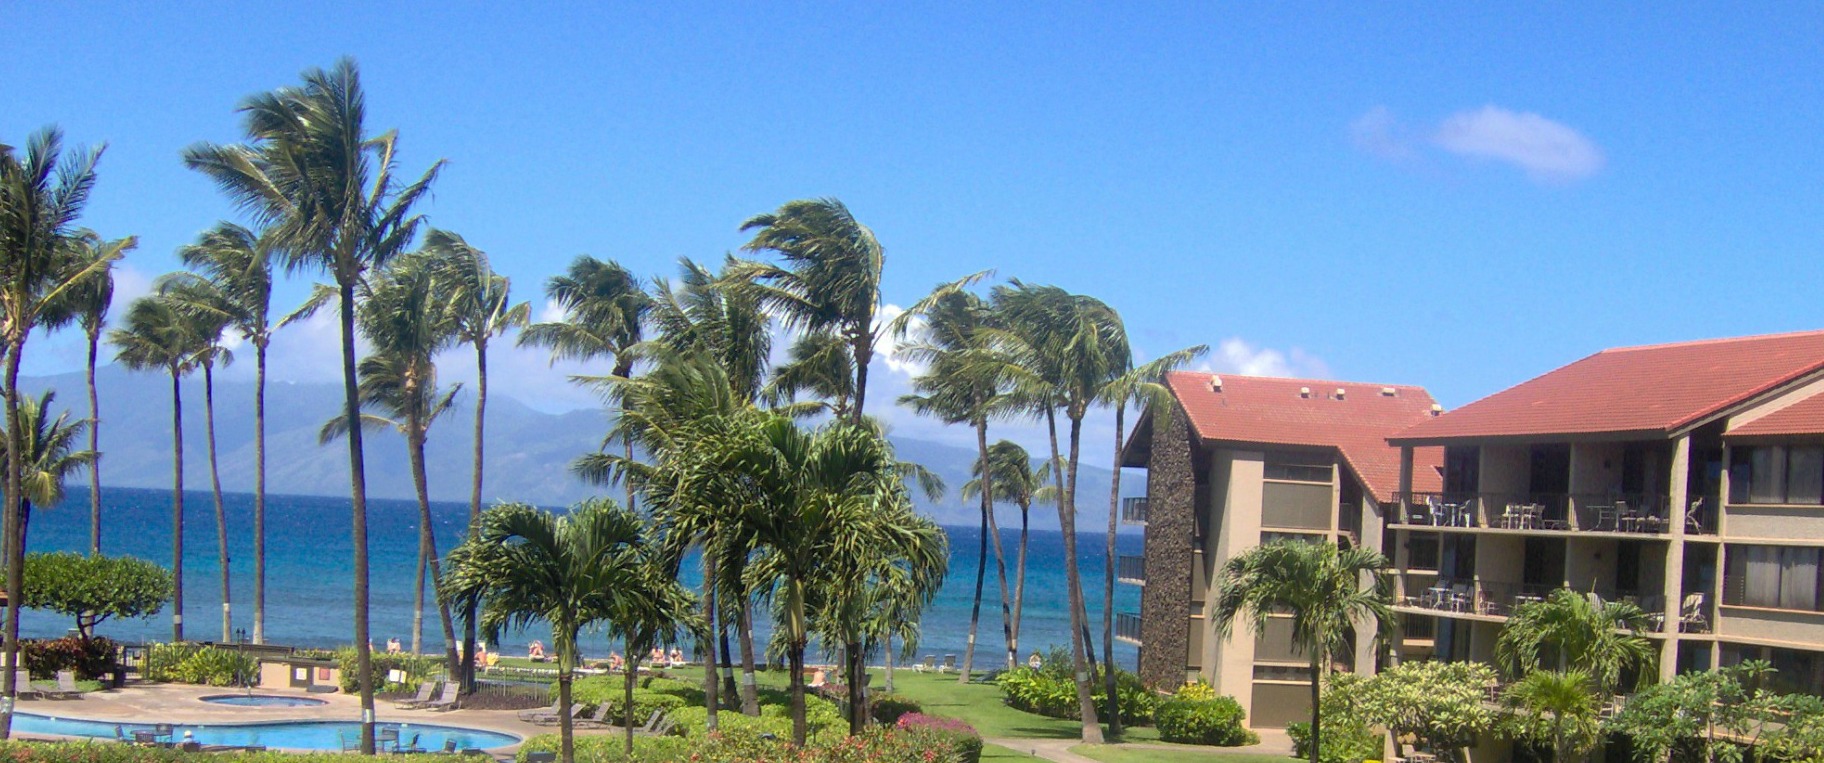 © Marsha Musselman 2016. View of condo when visiting Maui in 2005.